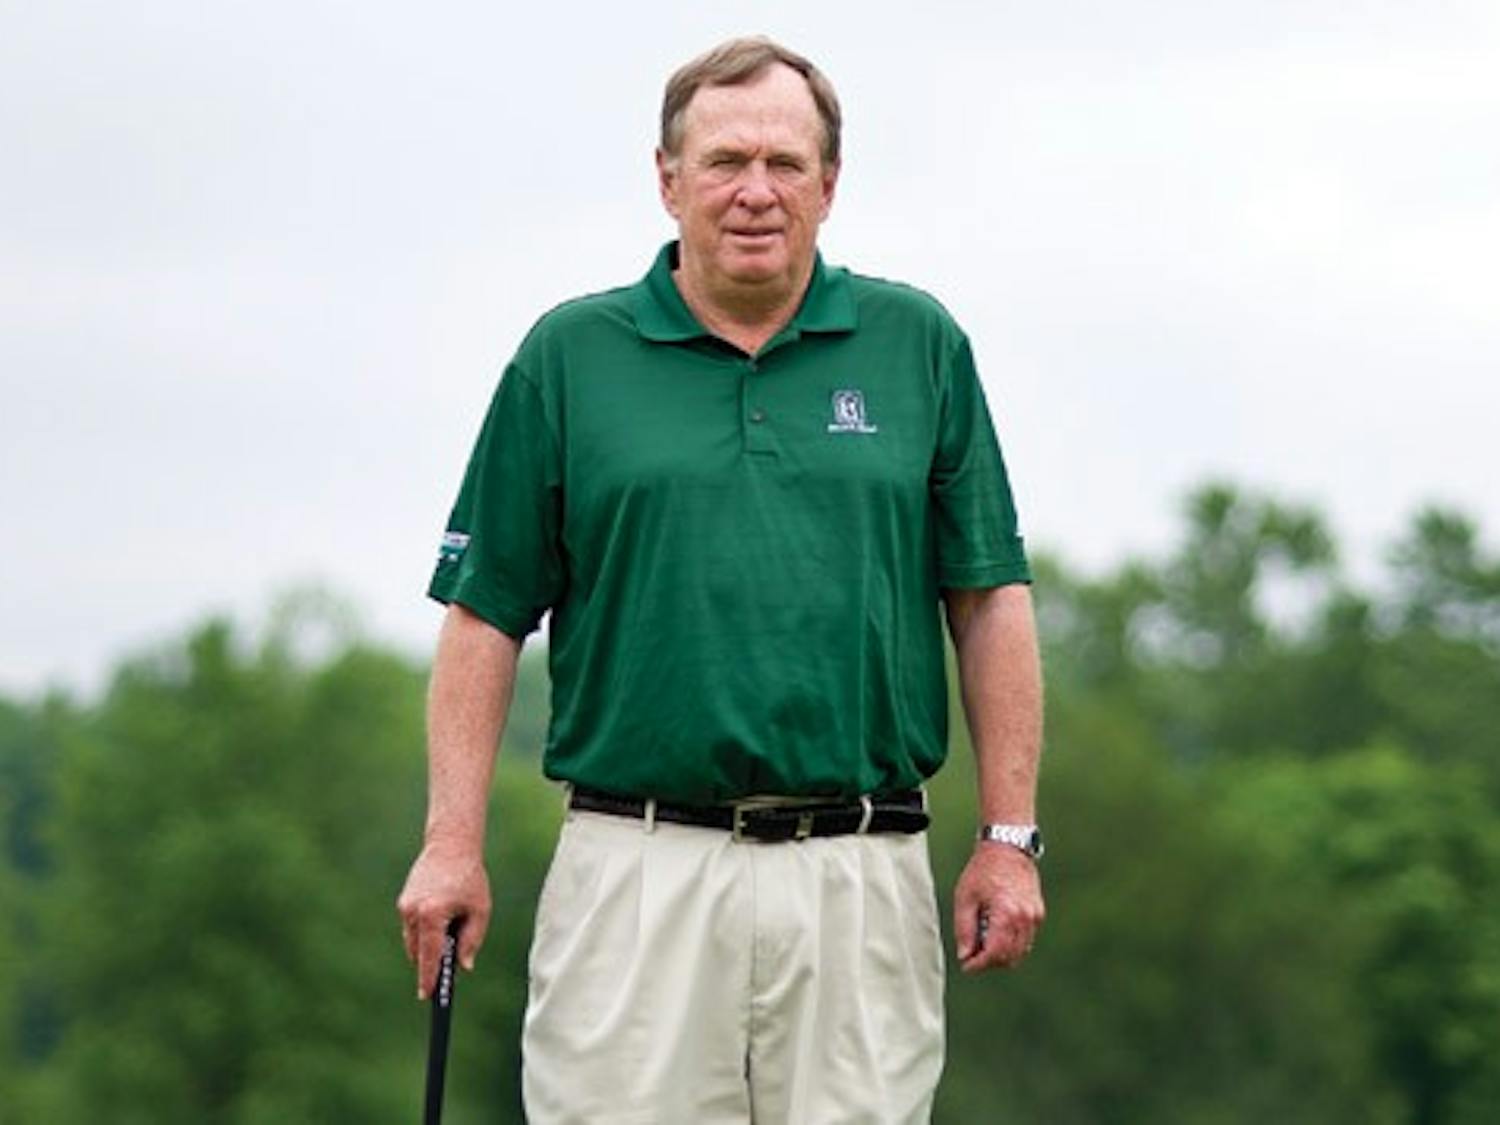 Coach still instructing on the links after 28 years with Bobcats  